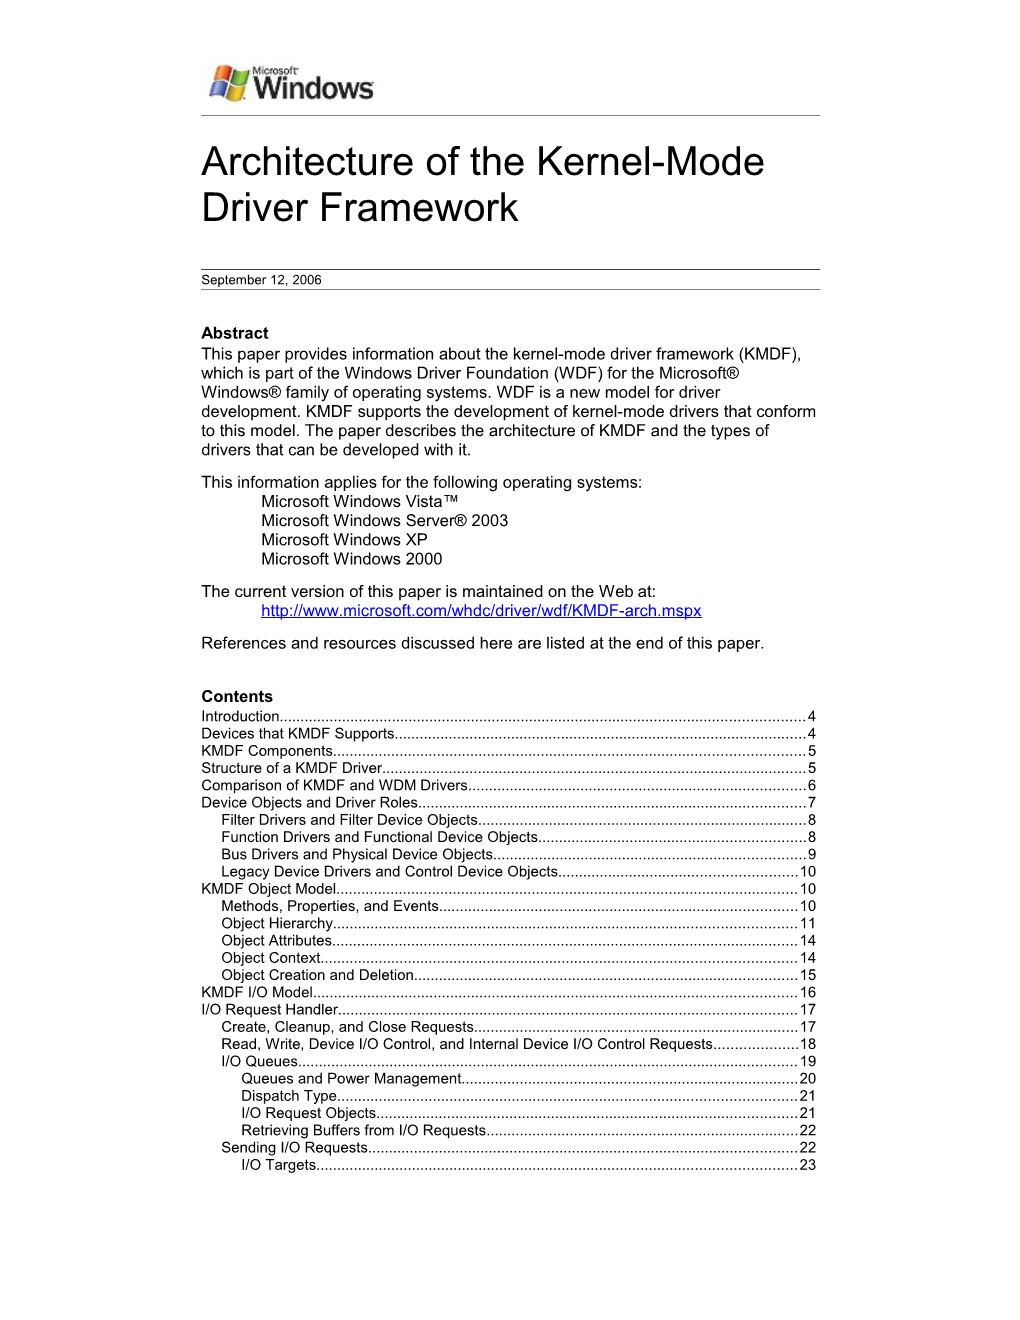 Architecture of the Kernel-Mode Driver Framework